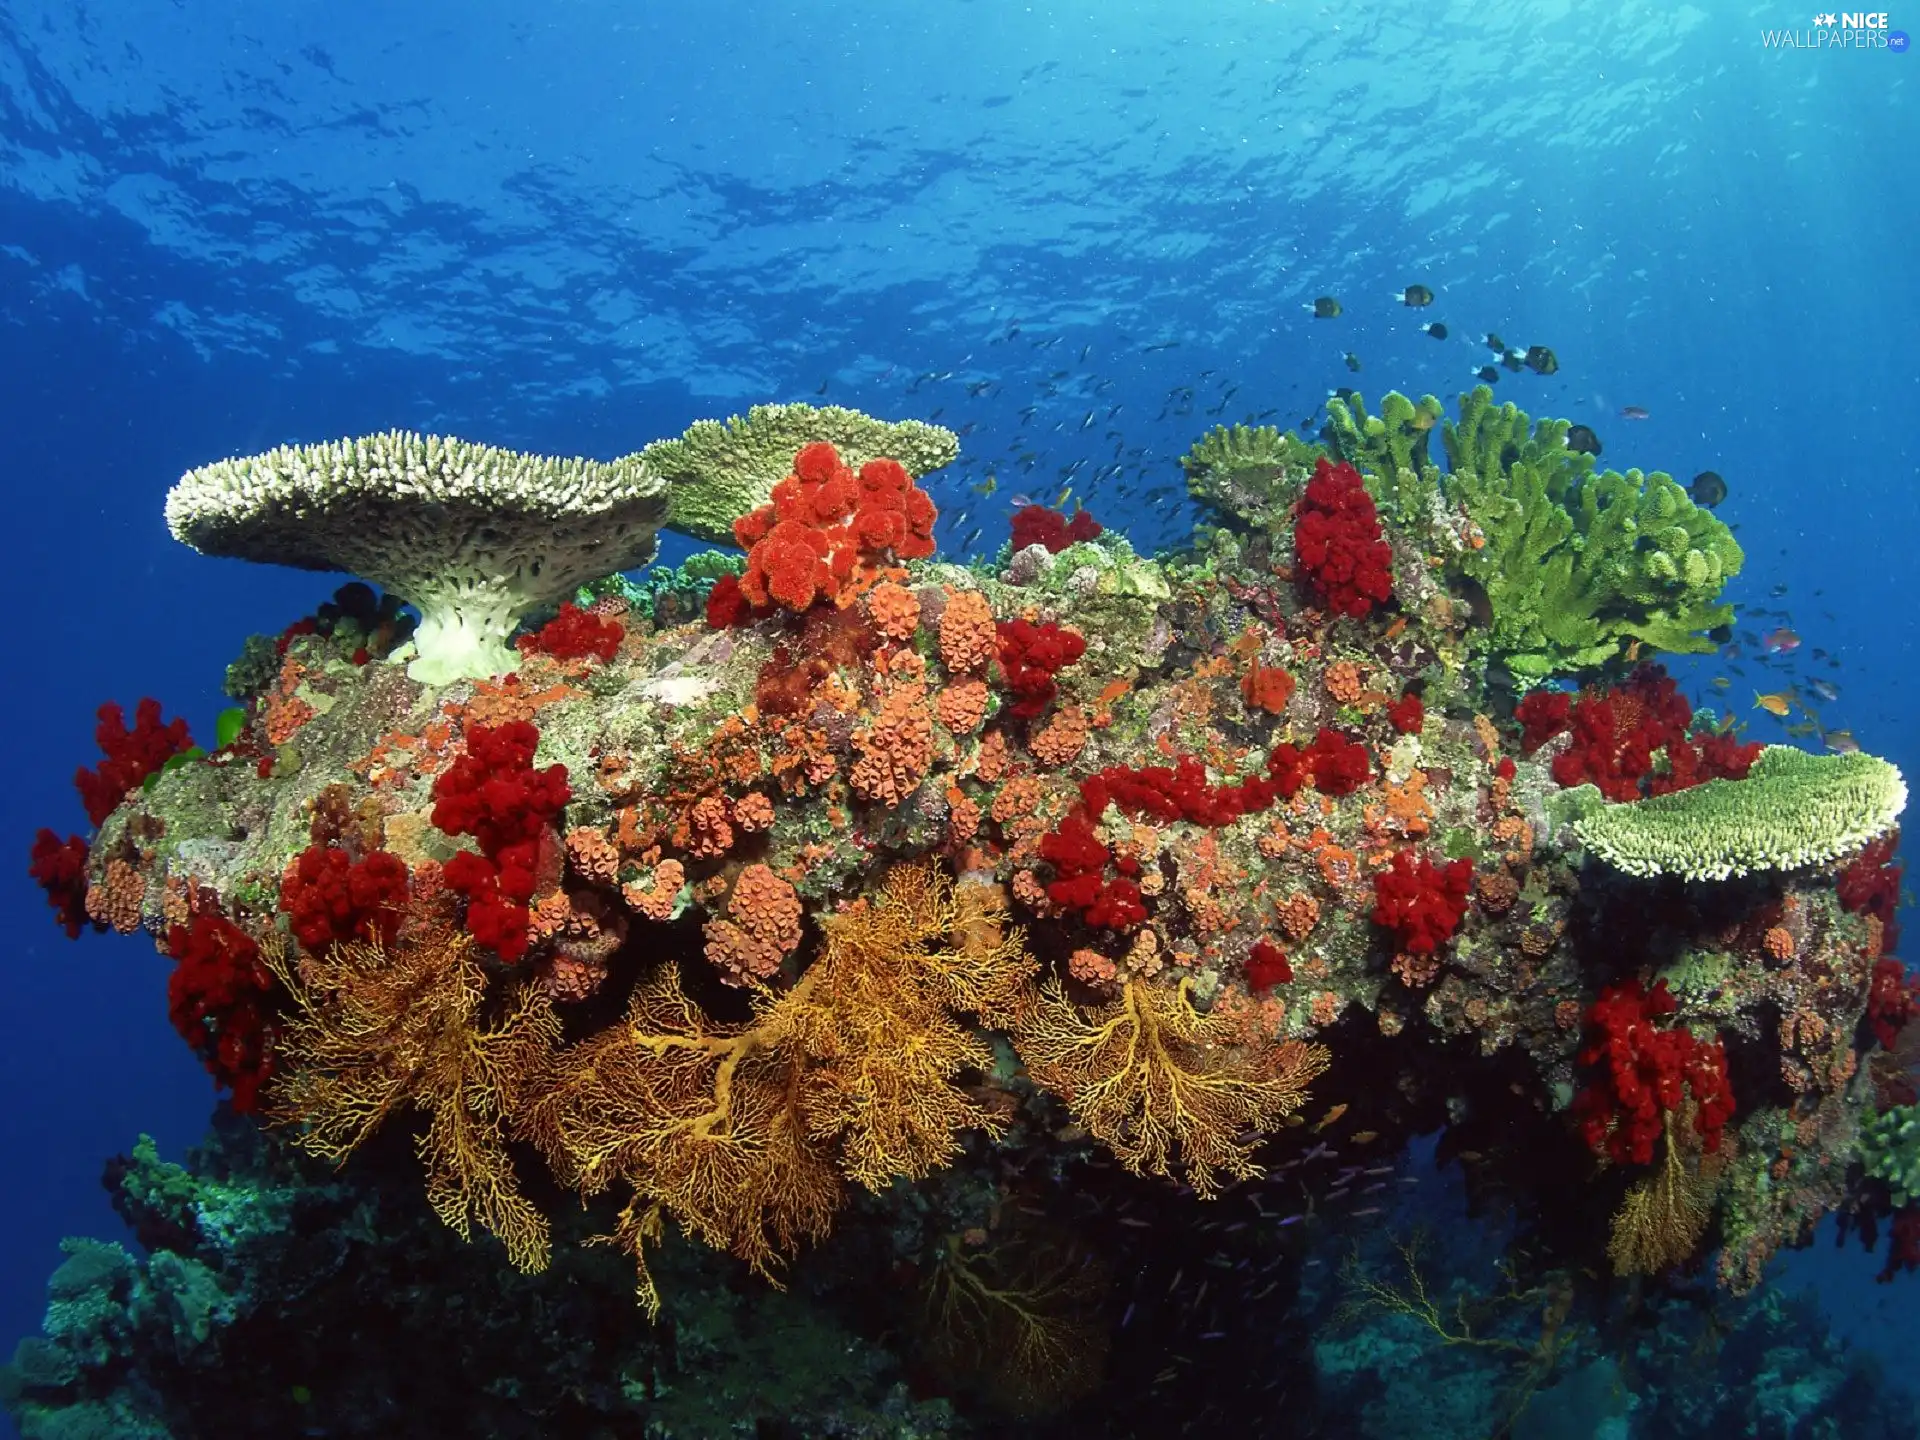 reef, water, fishes, coral